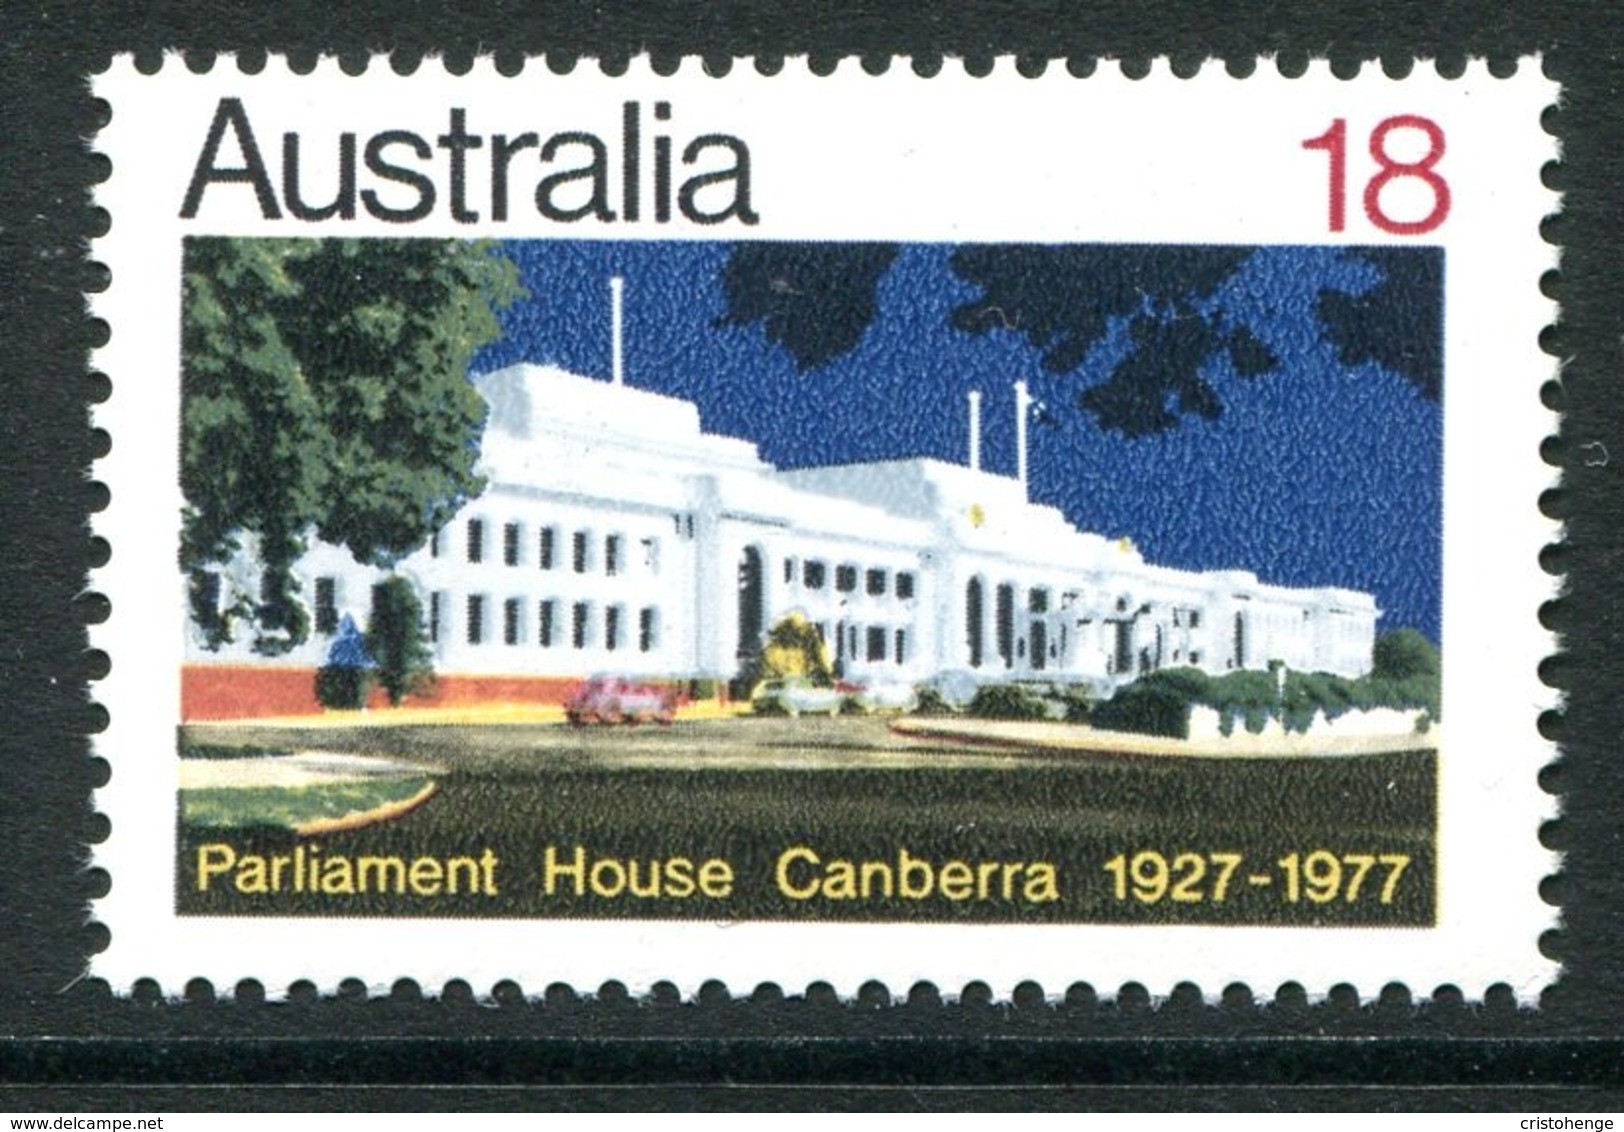 Australia 1977 50th Anniversary Of Opening Of Parliament House, Canberra MNH (SG 653) - Mint Stamps